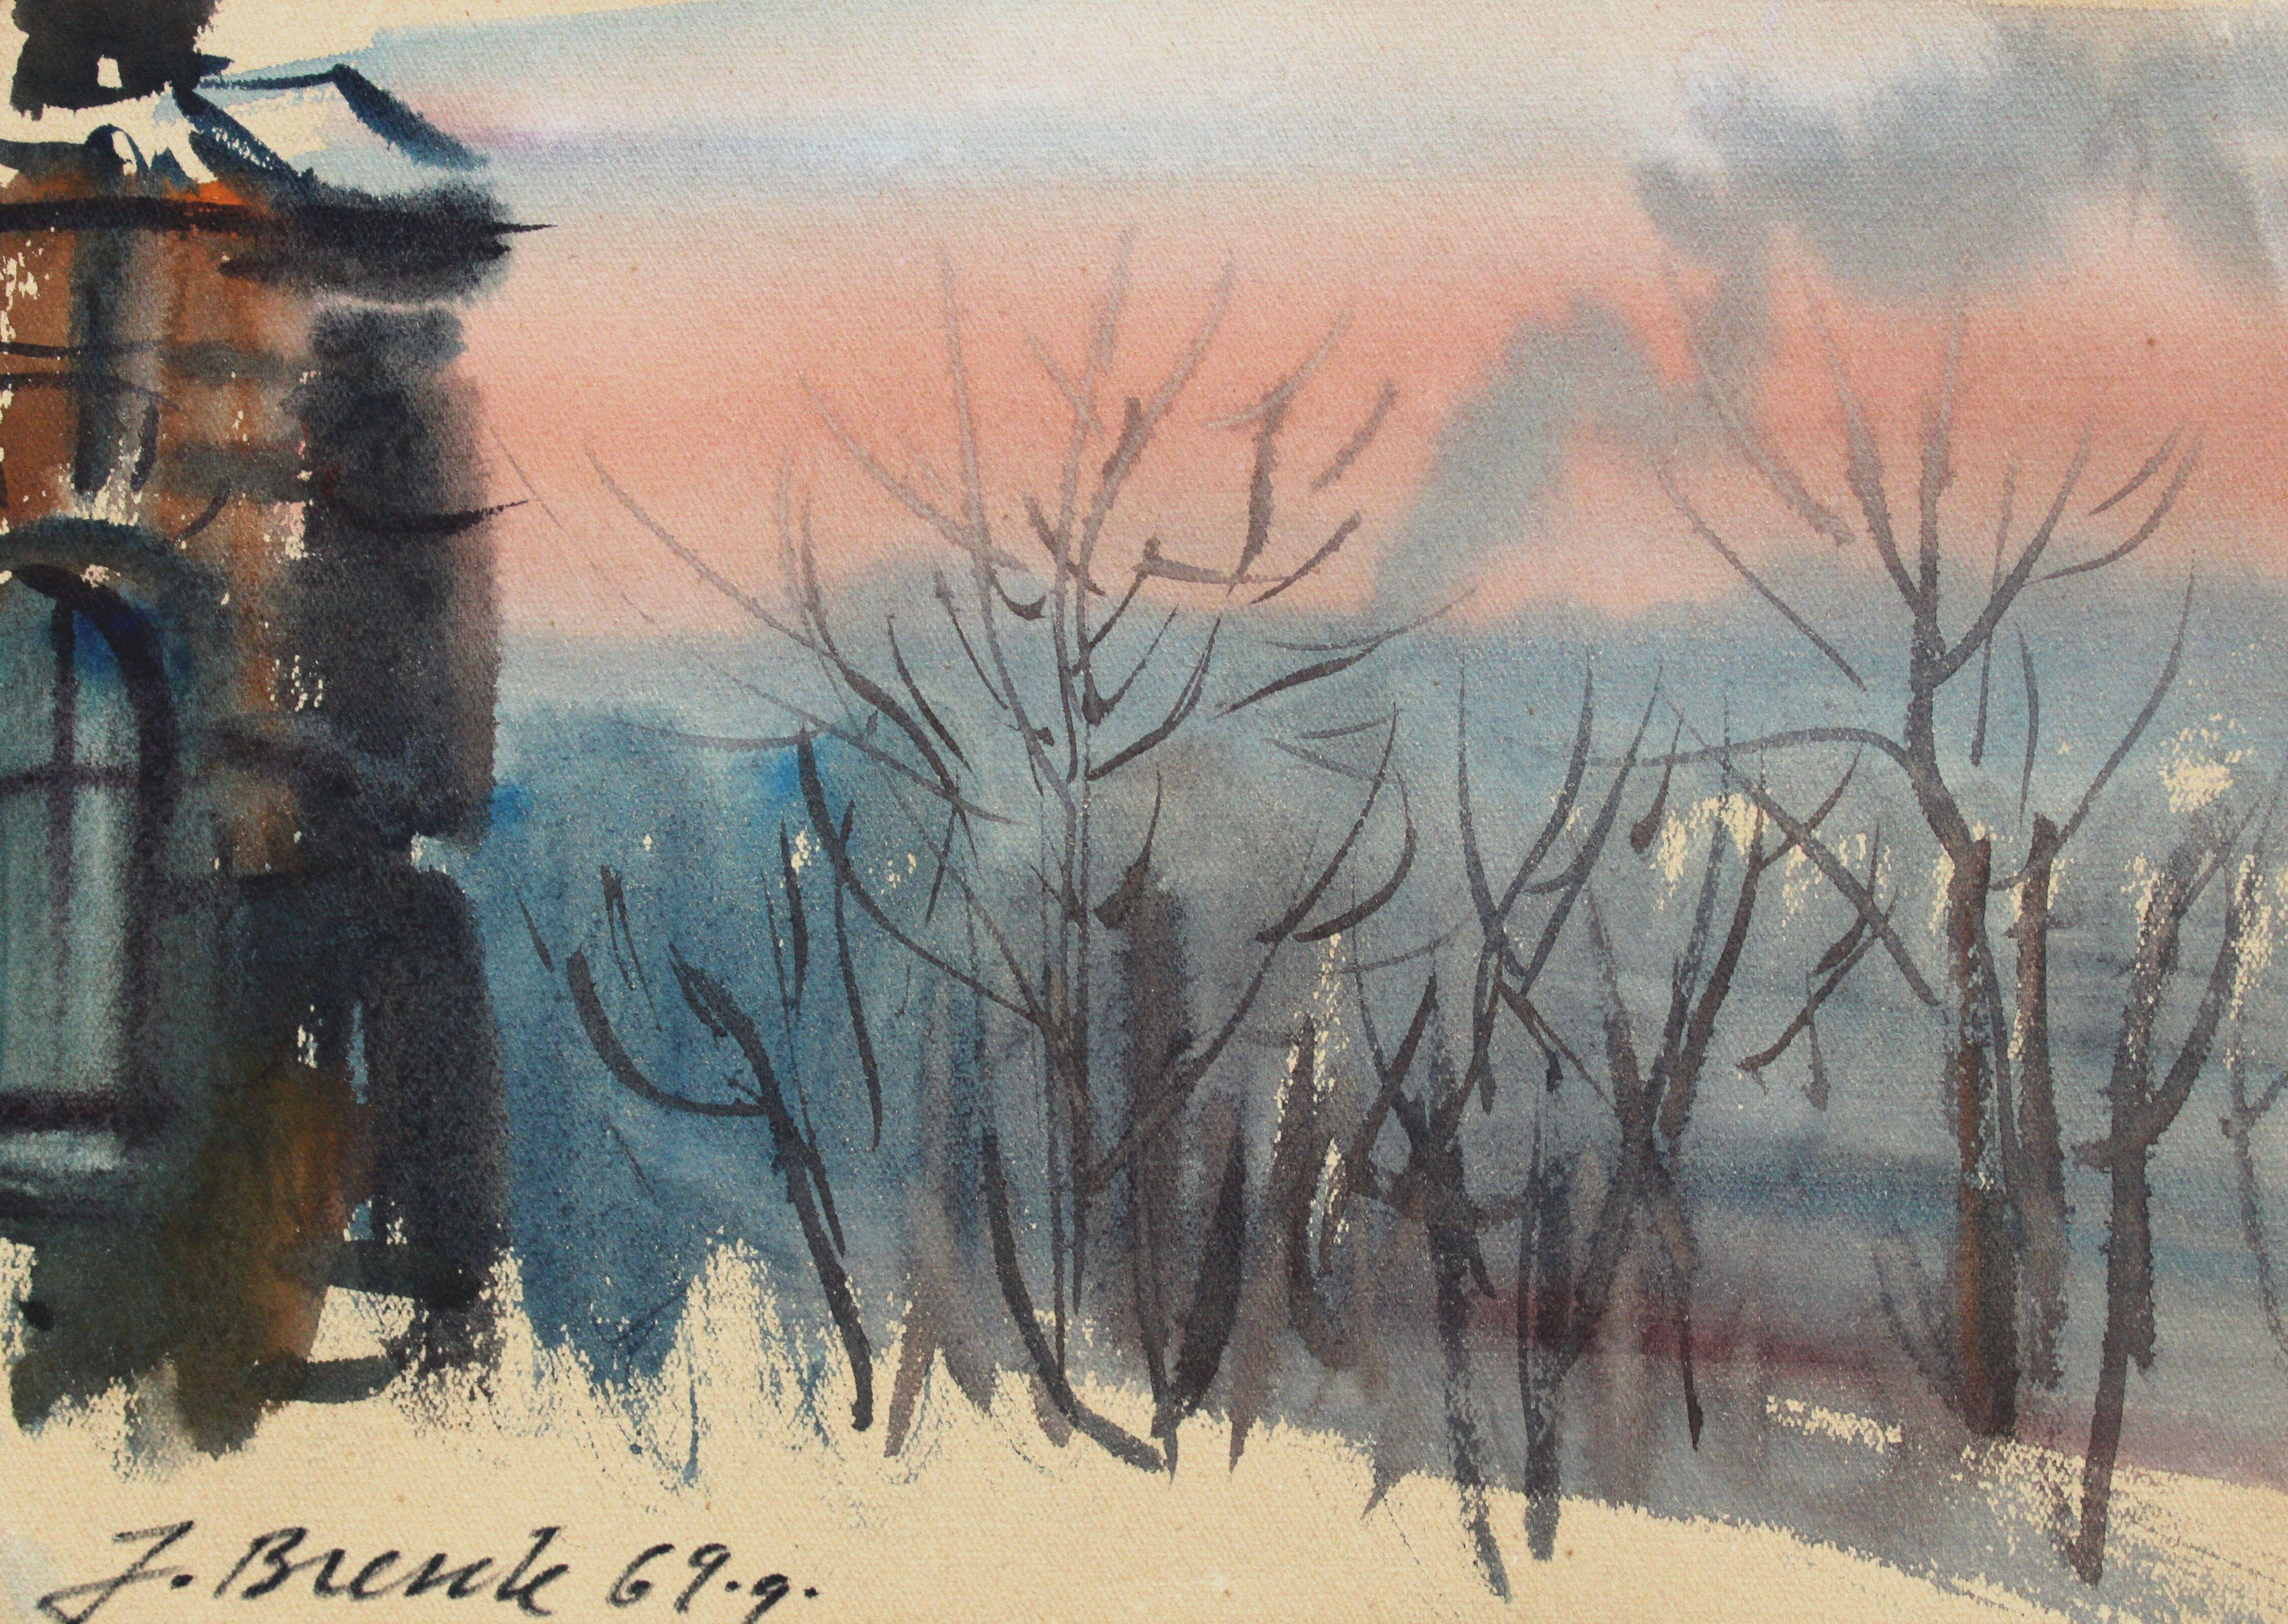 Janis Brekte Interior Painting - Winter day. 1969. Paper, watercolor, 15x21 cm